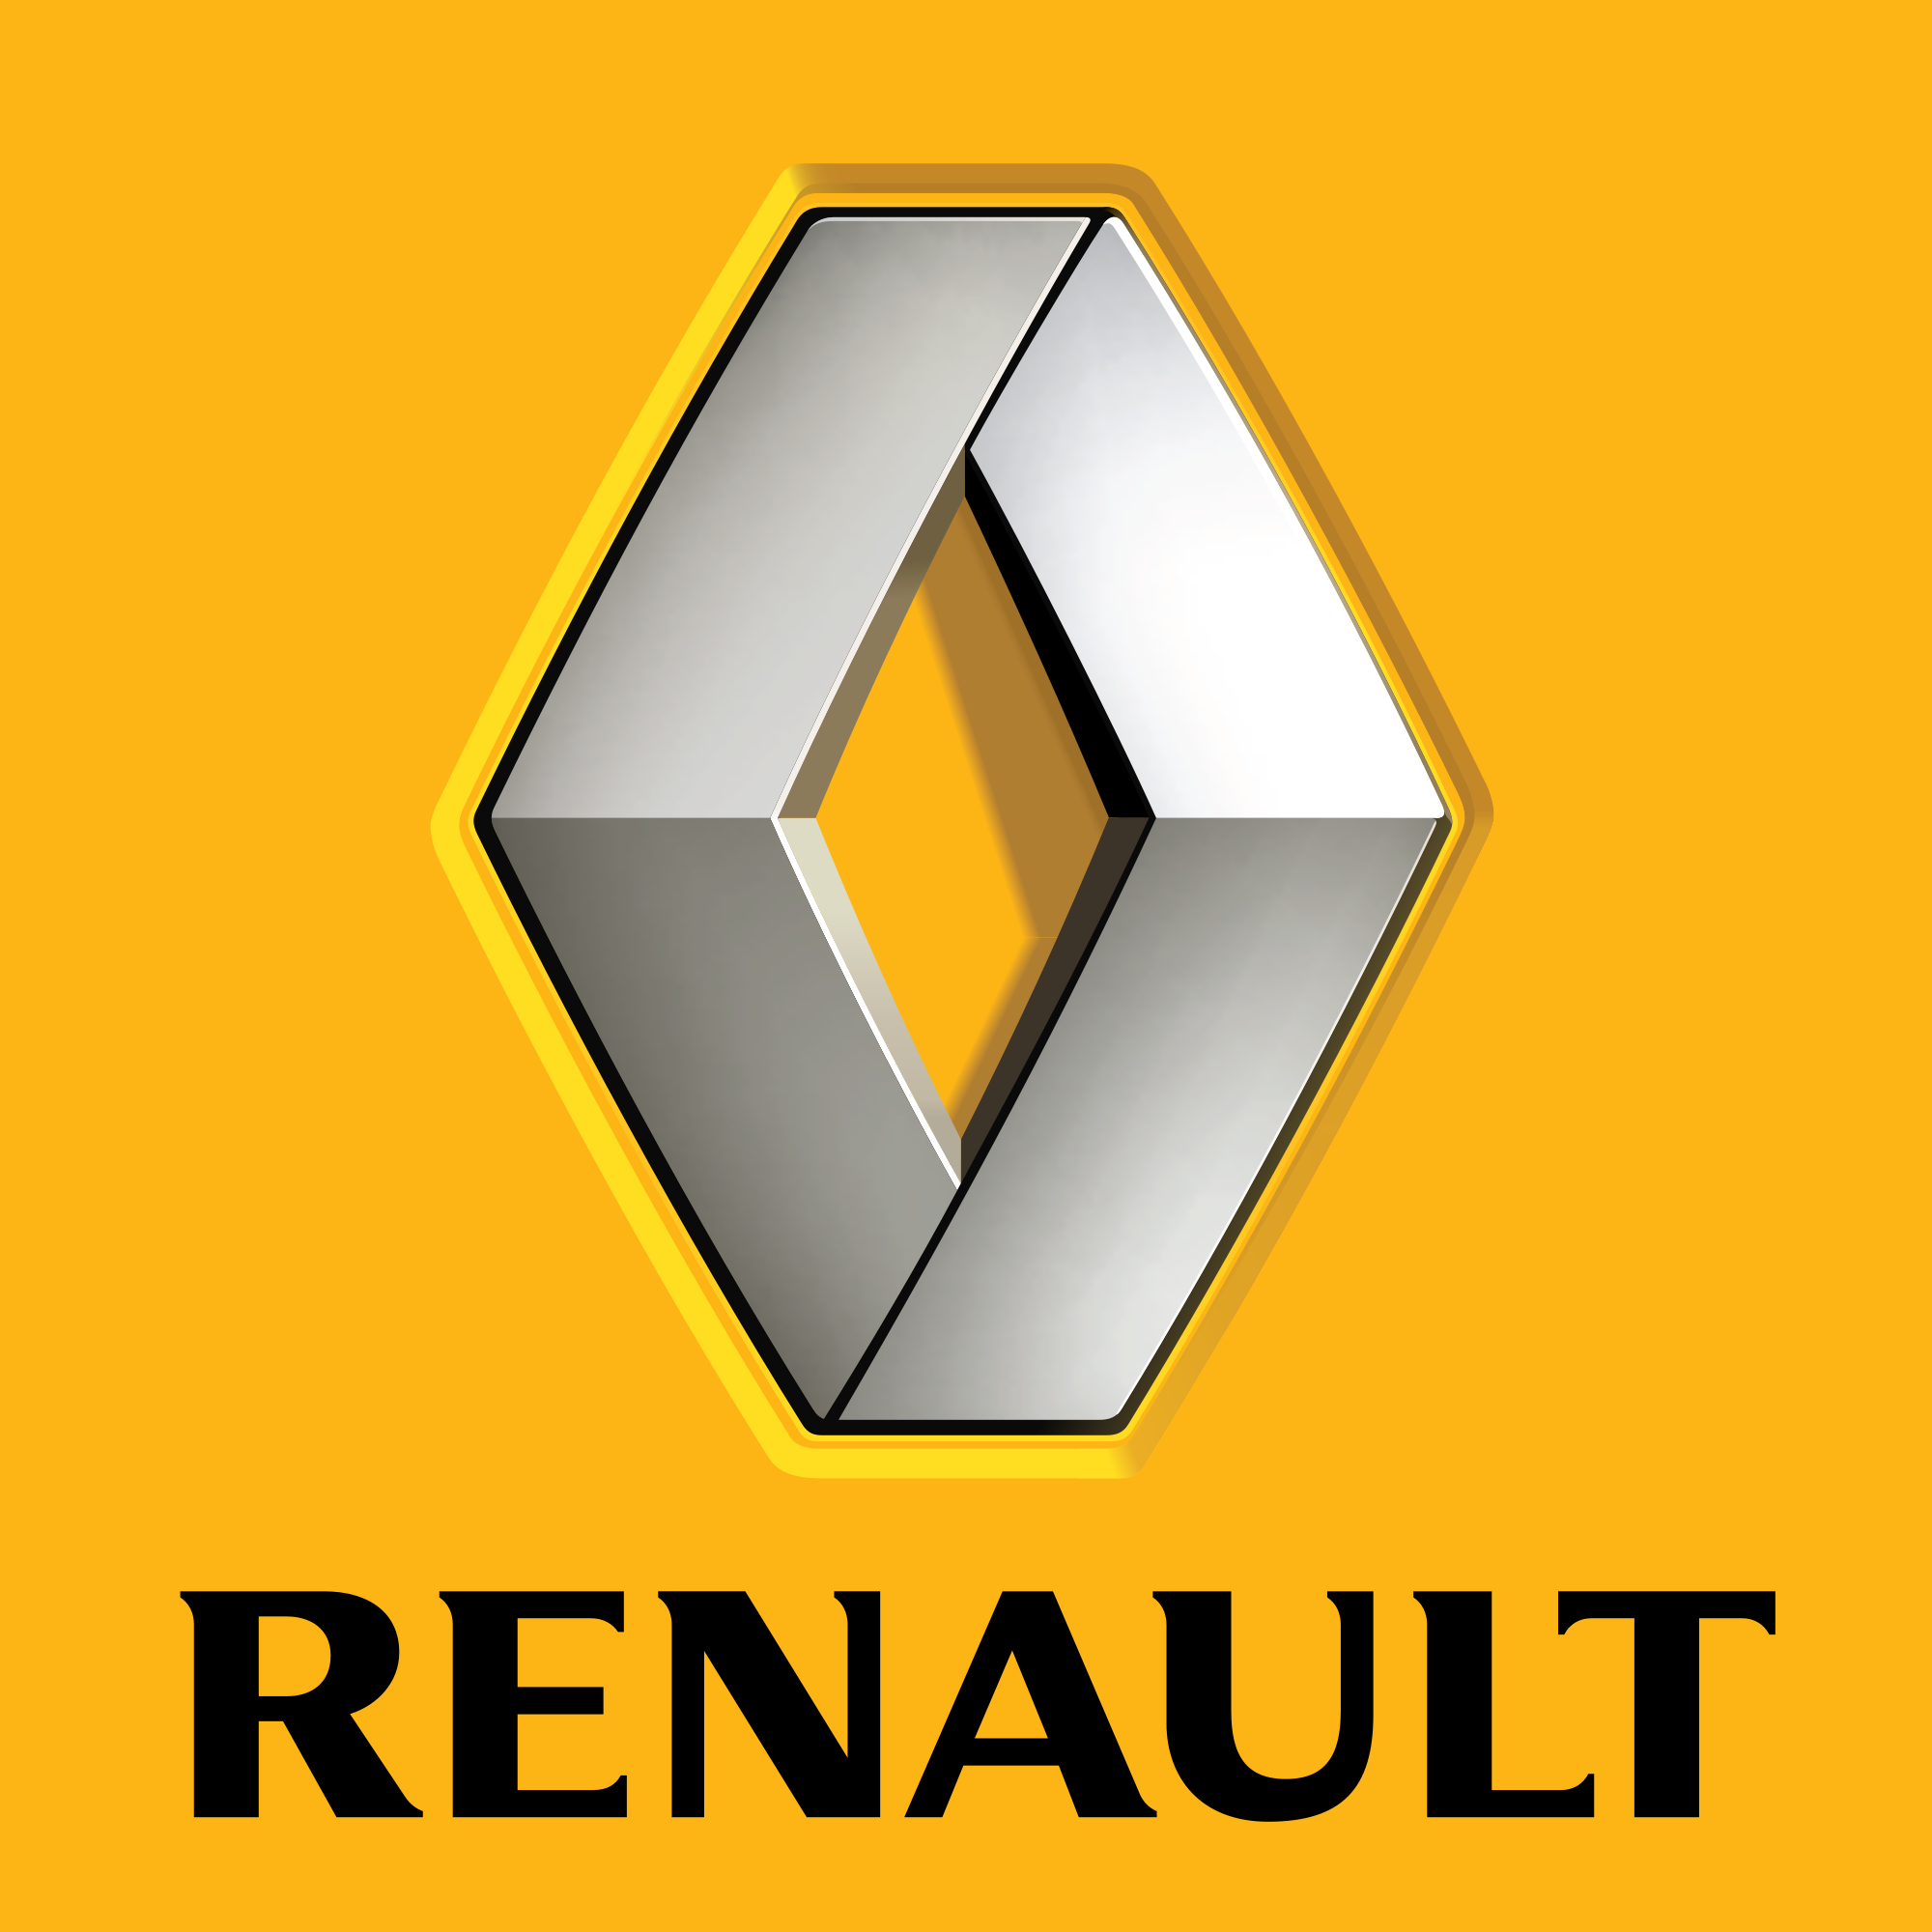 Renault Radio Advertisement by Thierry Legrand